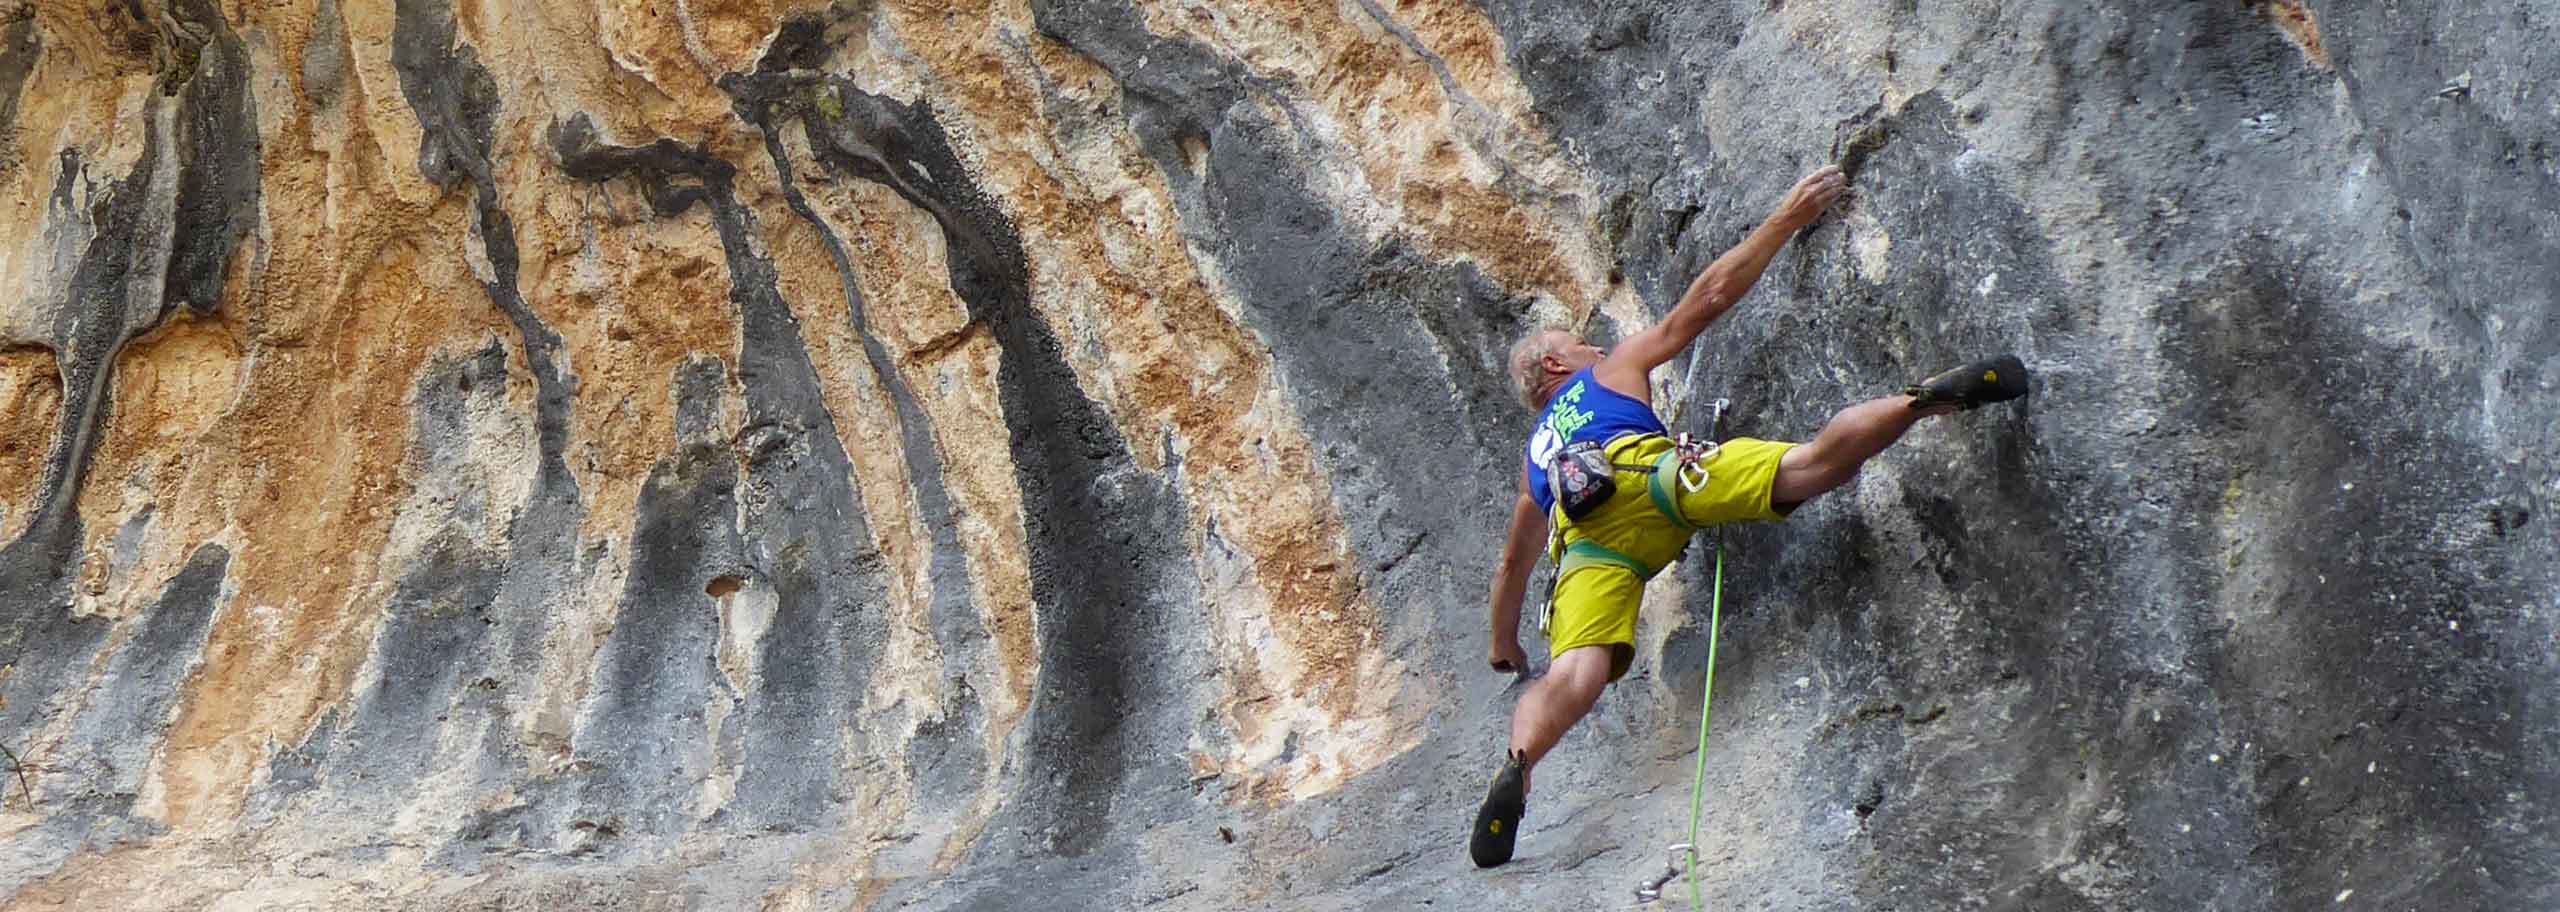 Rock Climbing in Great St. Bernard Valley, Trad and Sport Climbing Experience